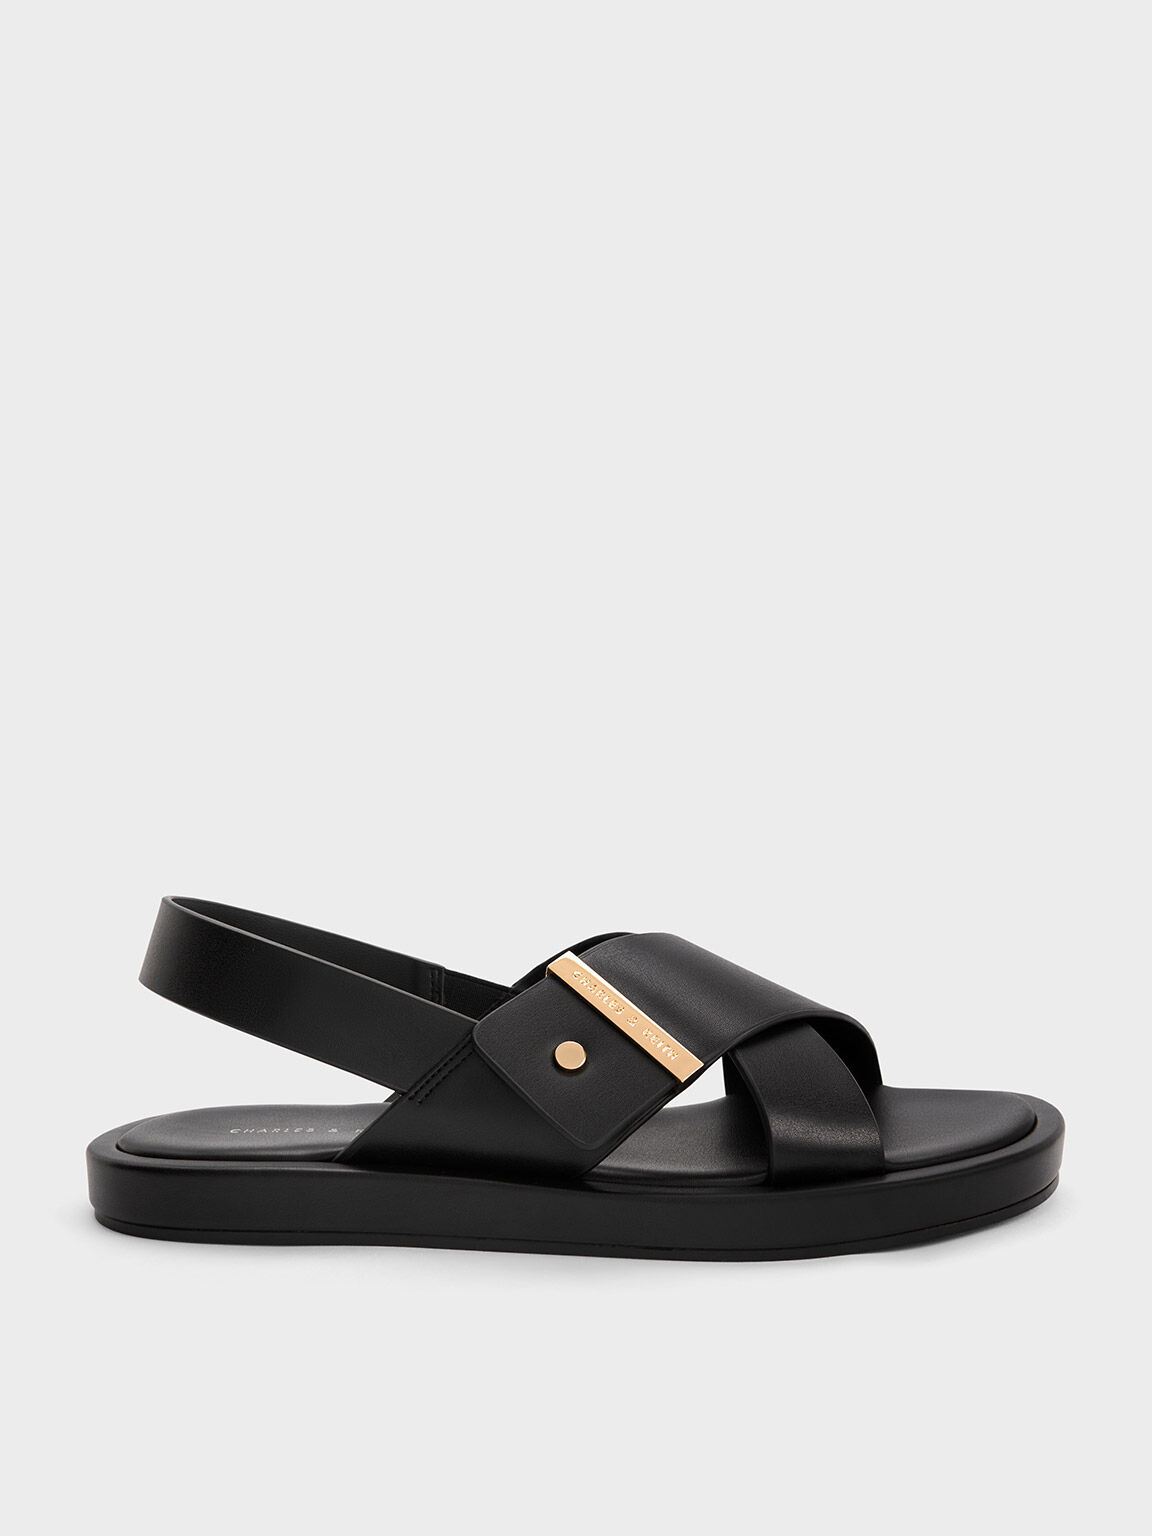 Women's Sandals | Shop Exclusive Styles | CHARLES & KEITH VN